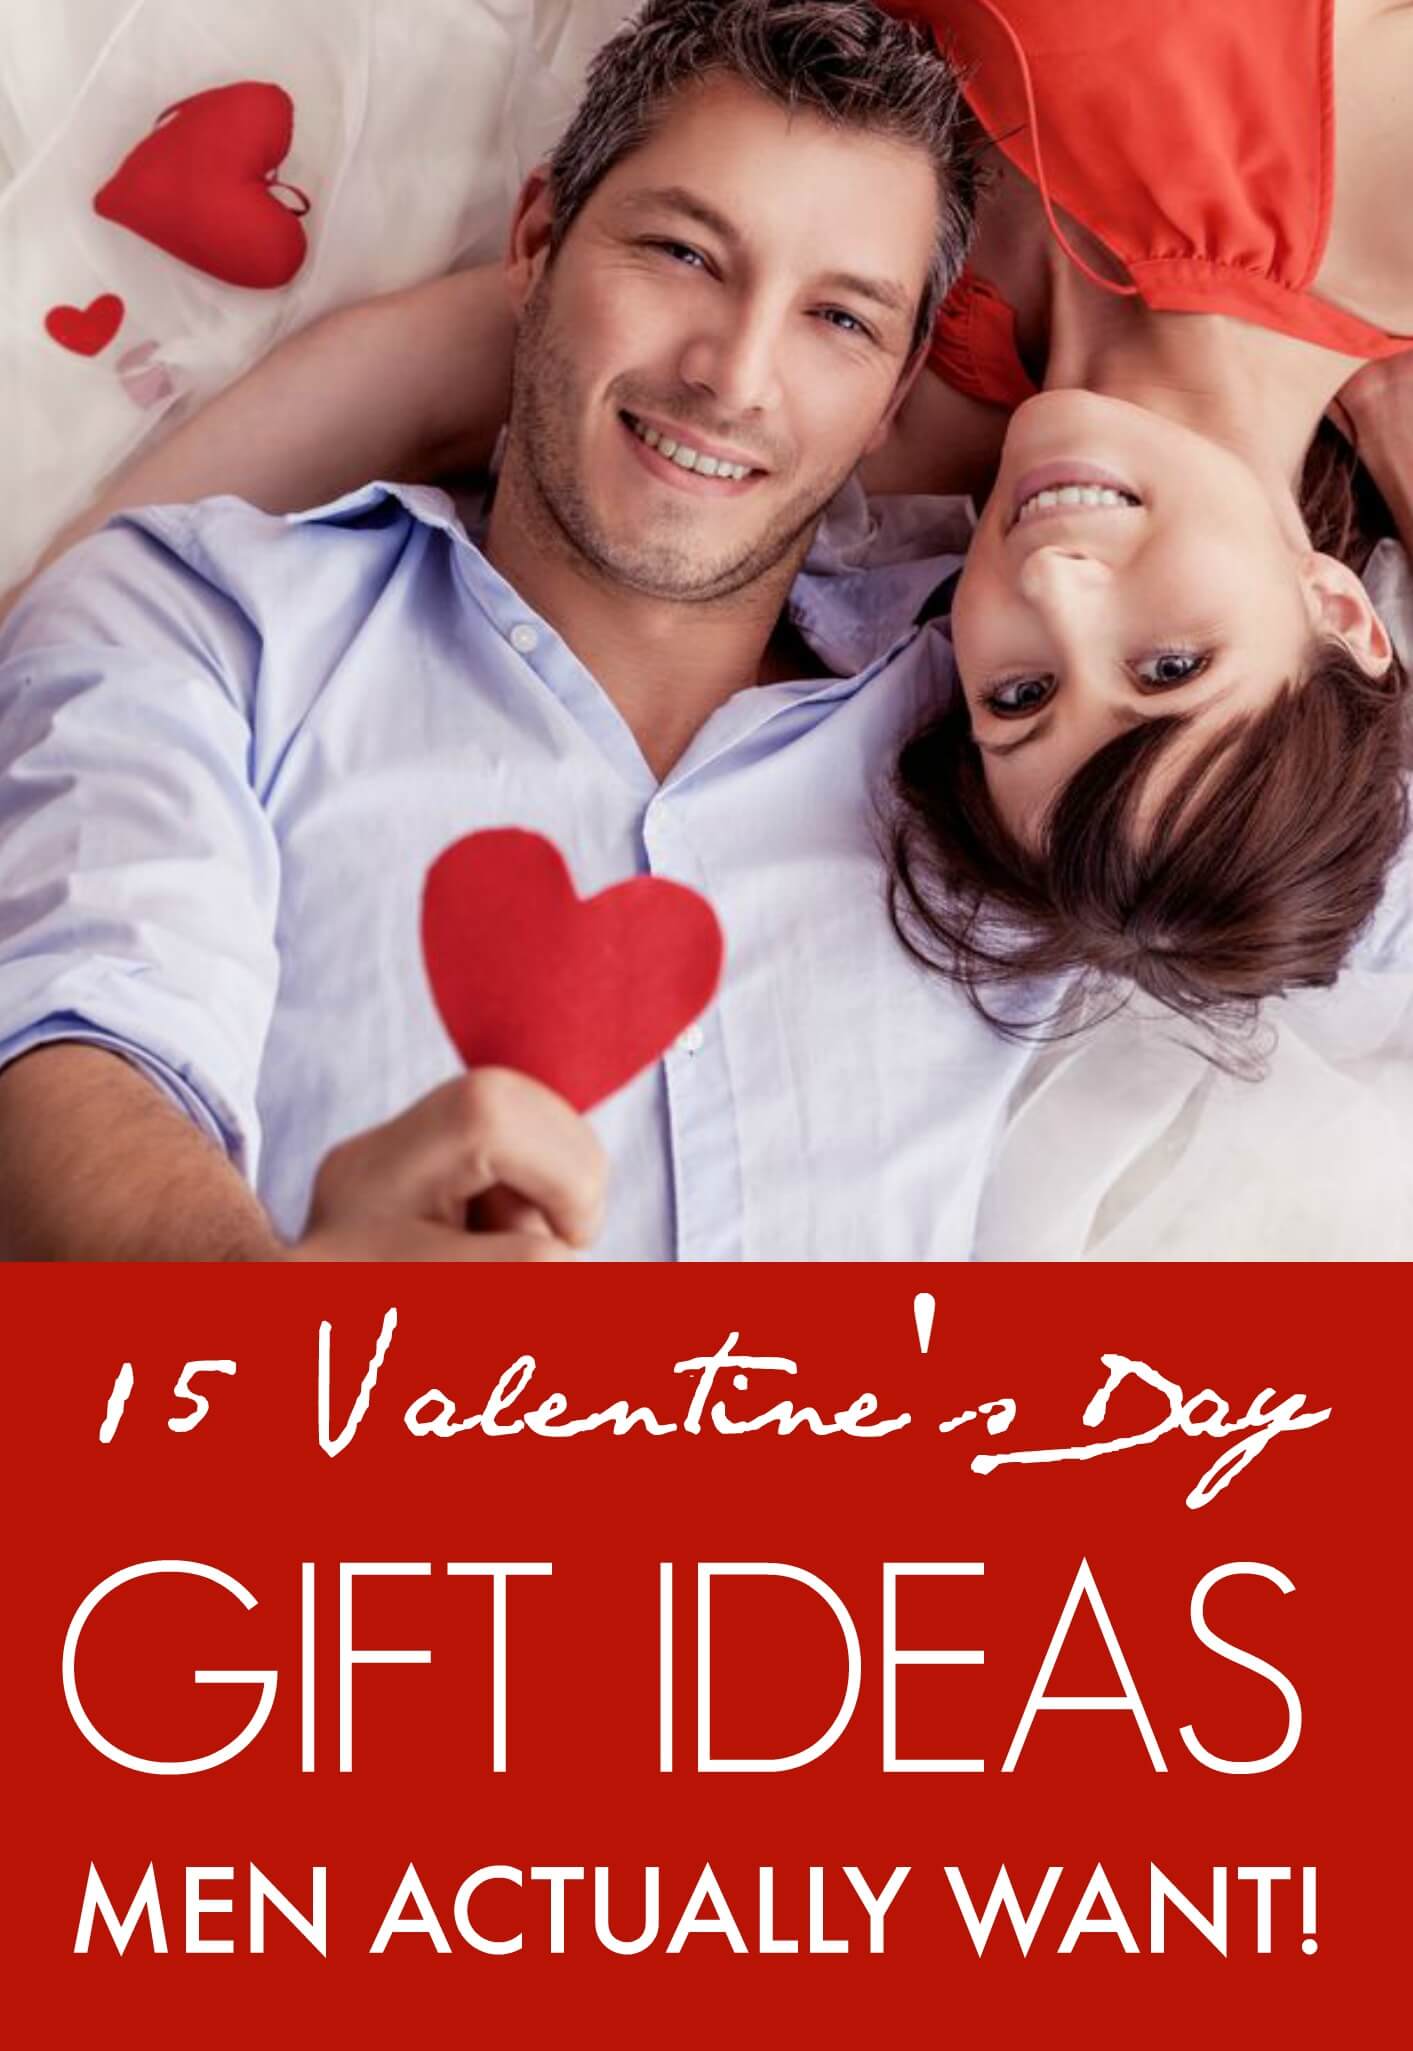 15 Valentine’s Day Gift ideas Men Actually Want